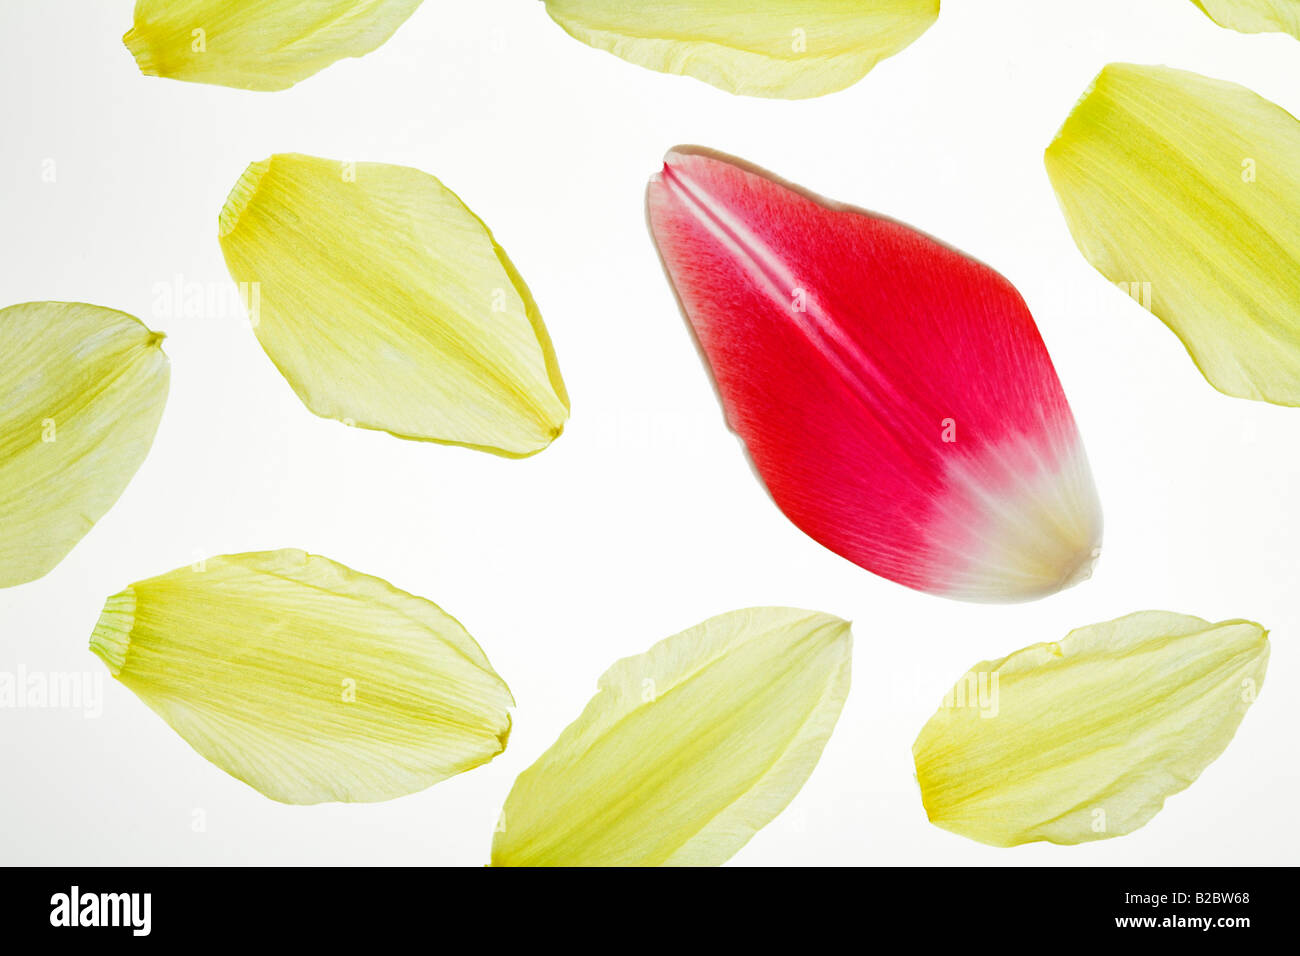 Petals from a red Tulip (Tulipa) and a yellow Daffodil (Narcissus) Stock Photo